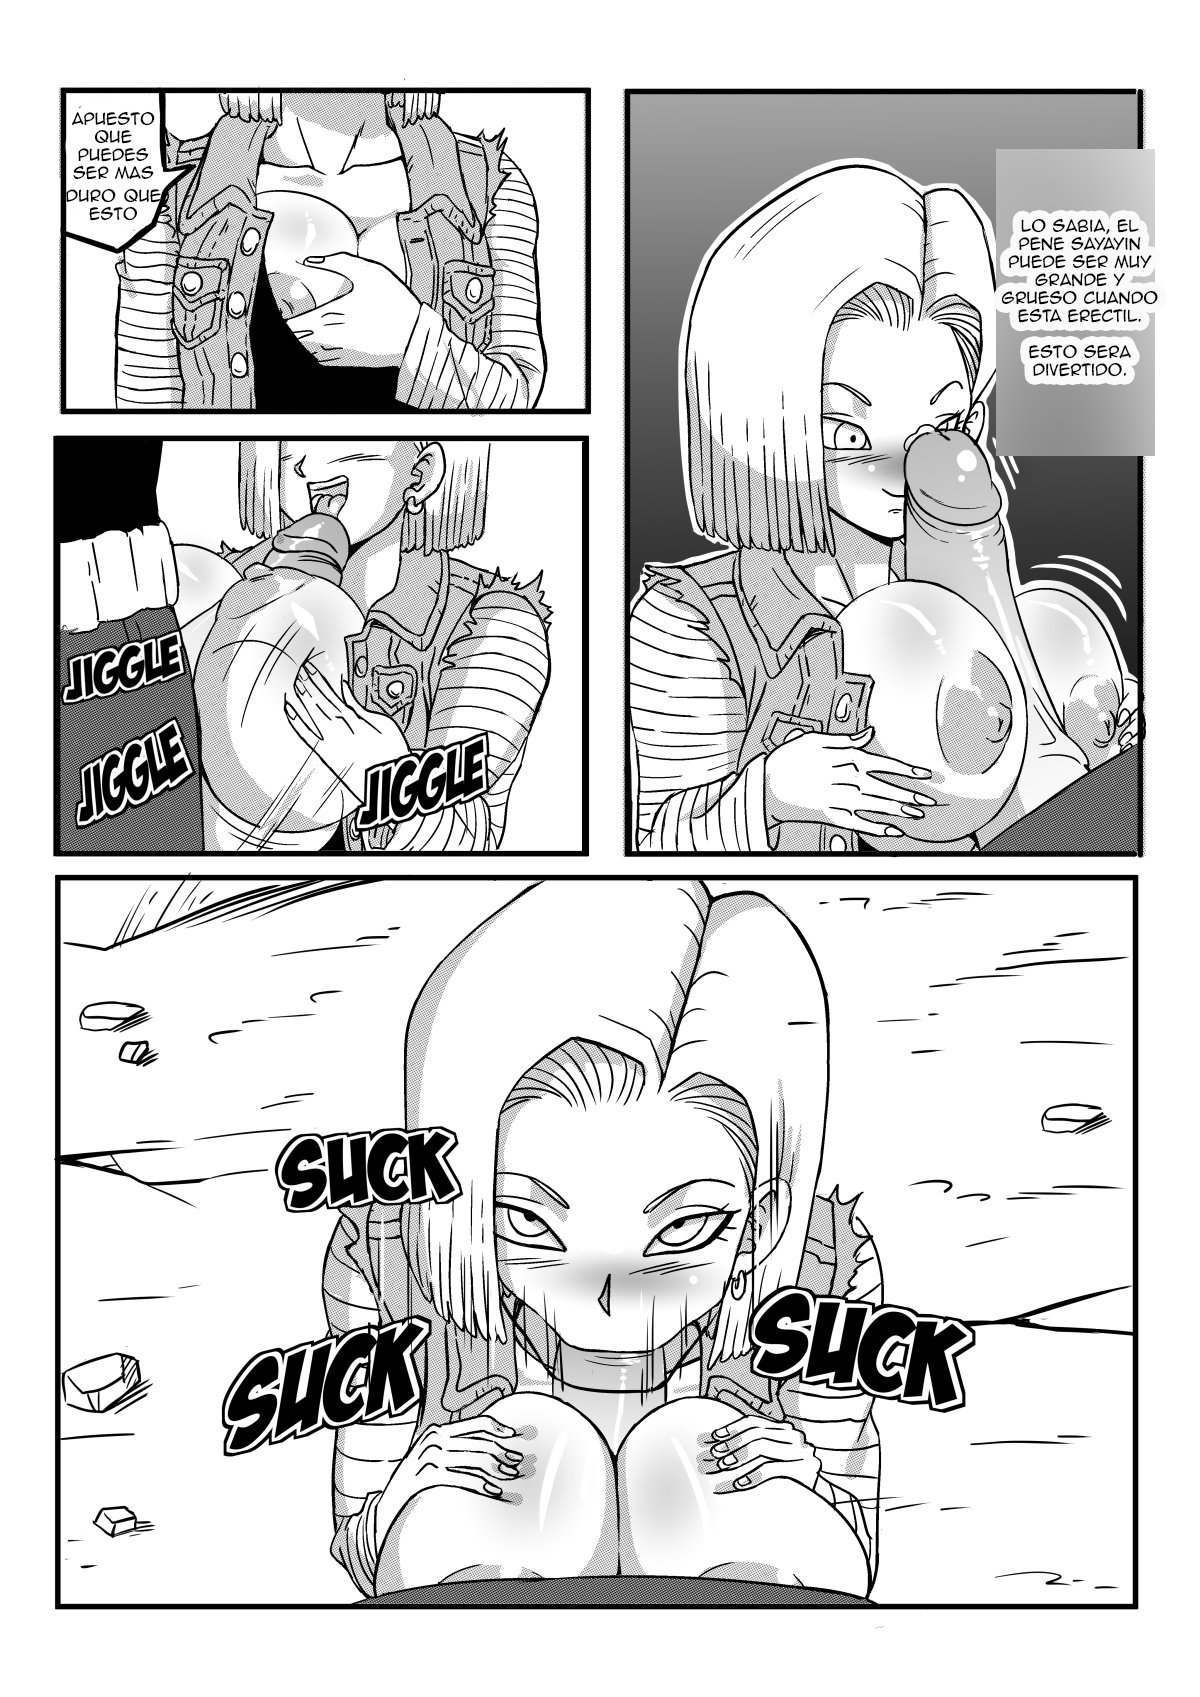 Android 18 Stays in the Future - 4